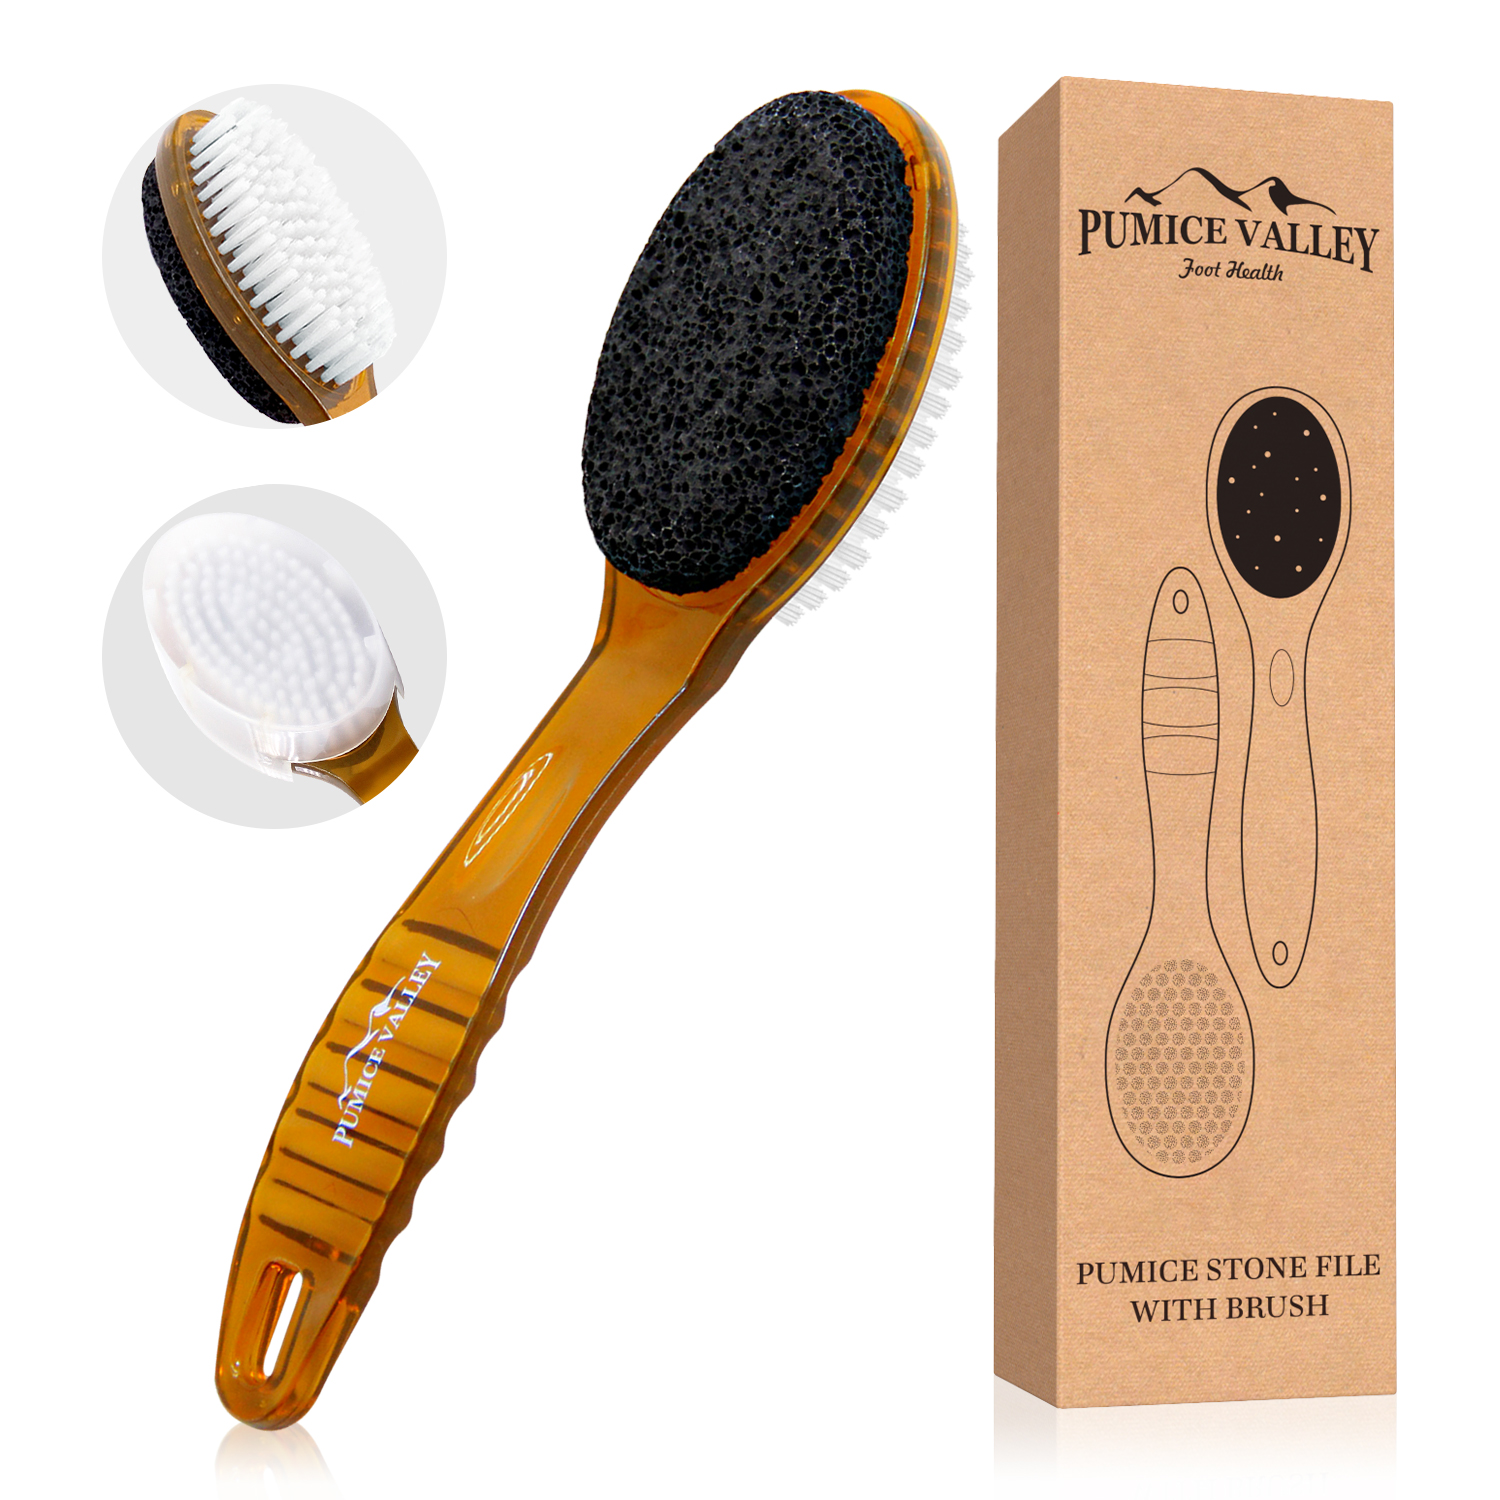 Pumice Stone Brush for Feet & Foot Brush with Handle 2-in-1